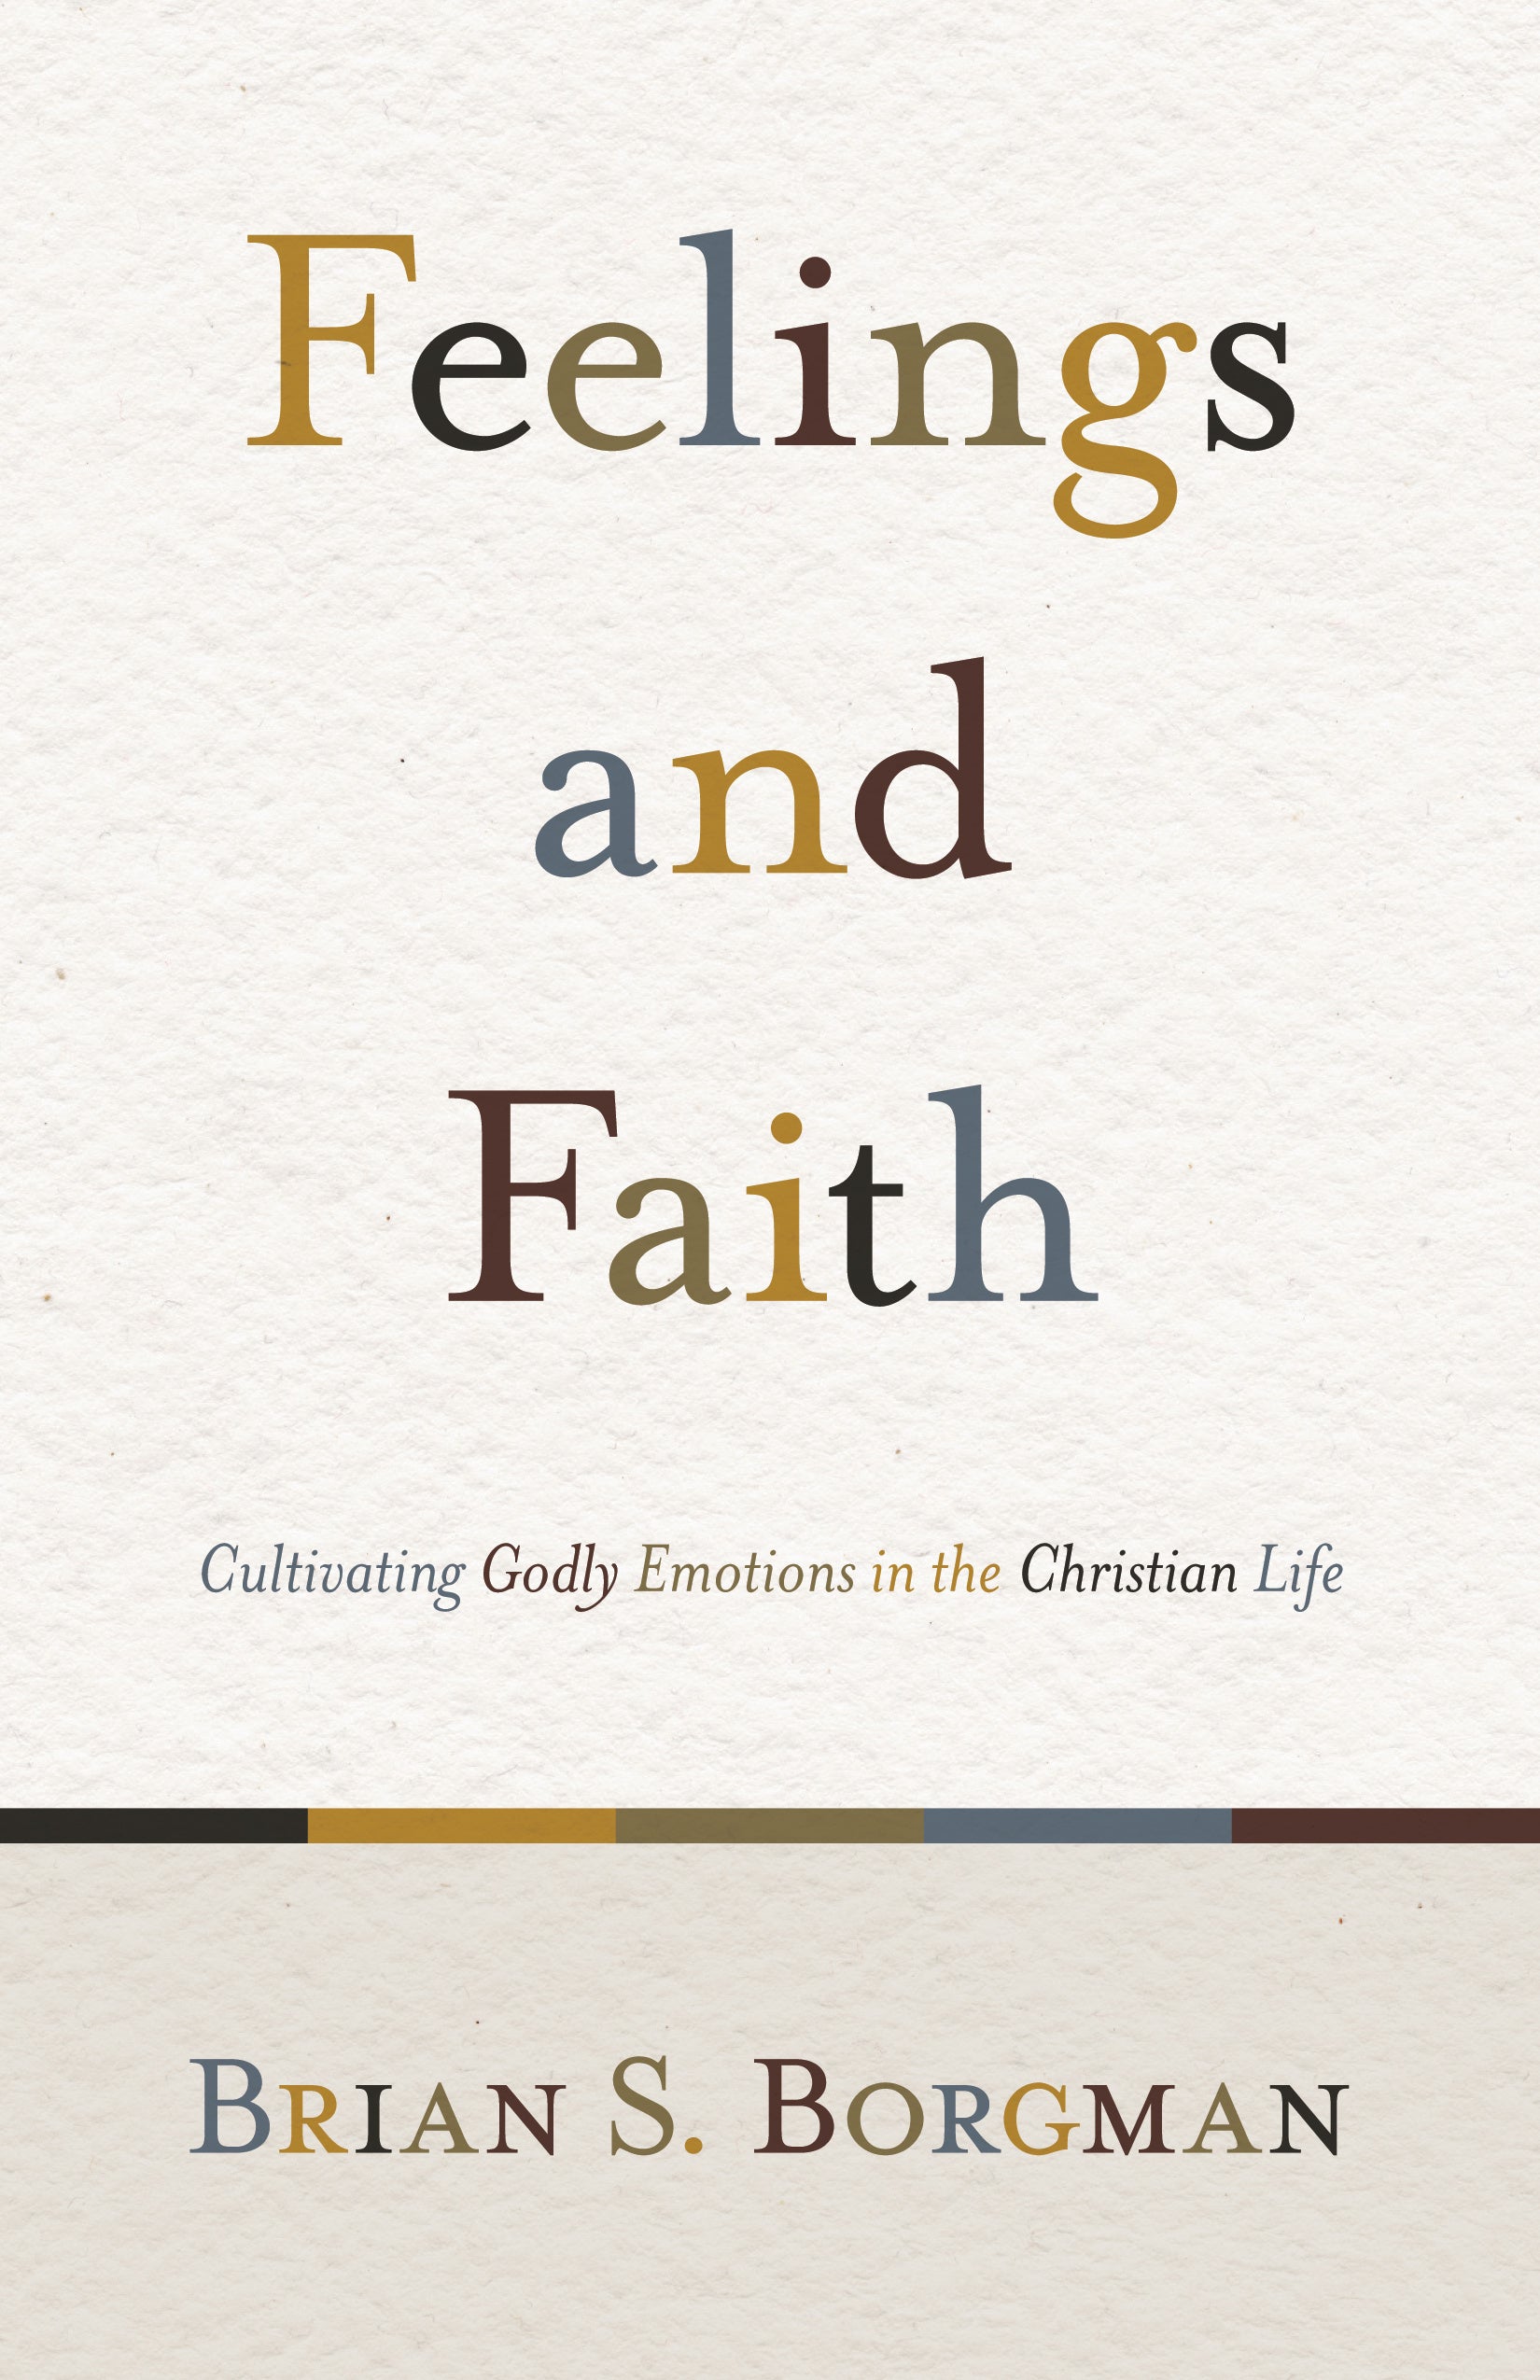 Image of Feelings and Faith other